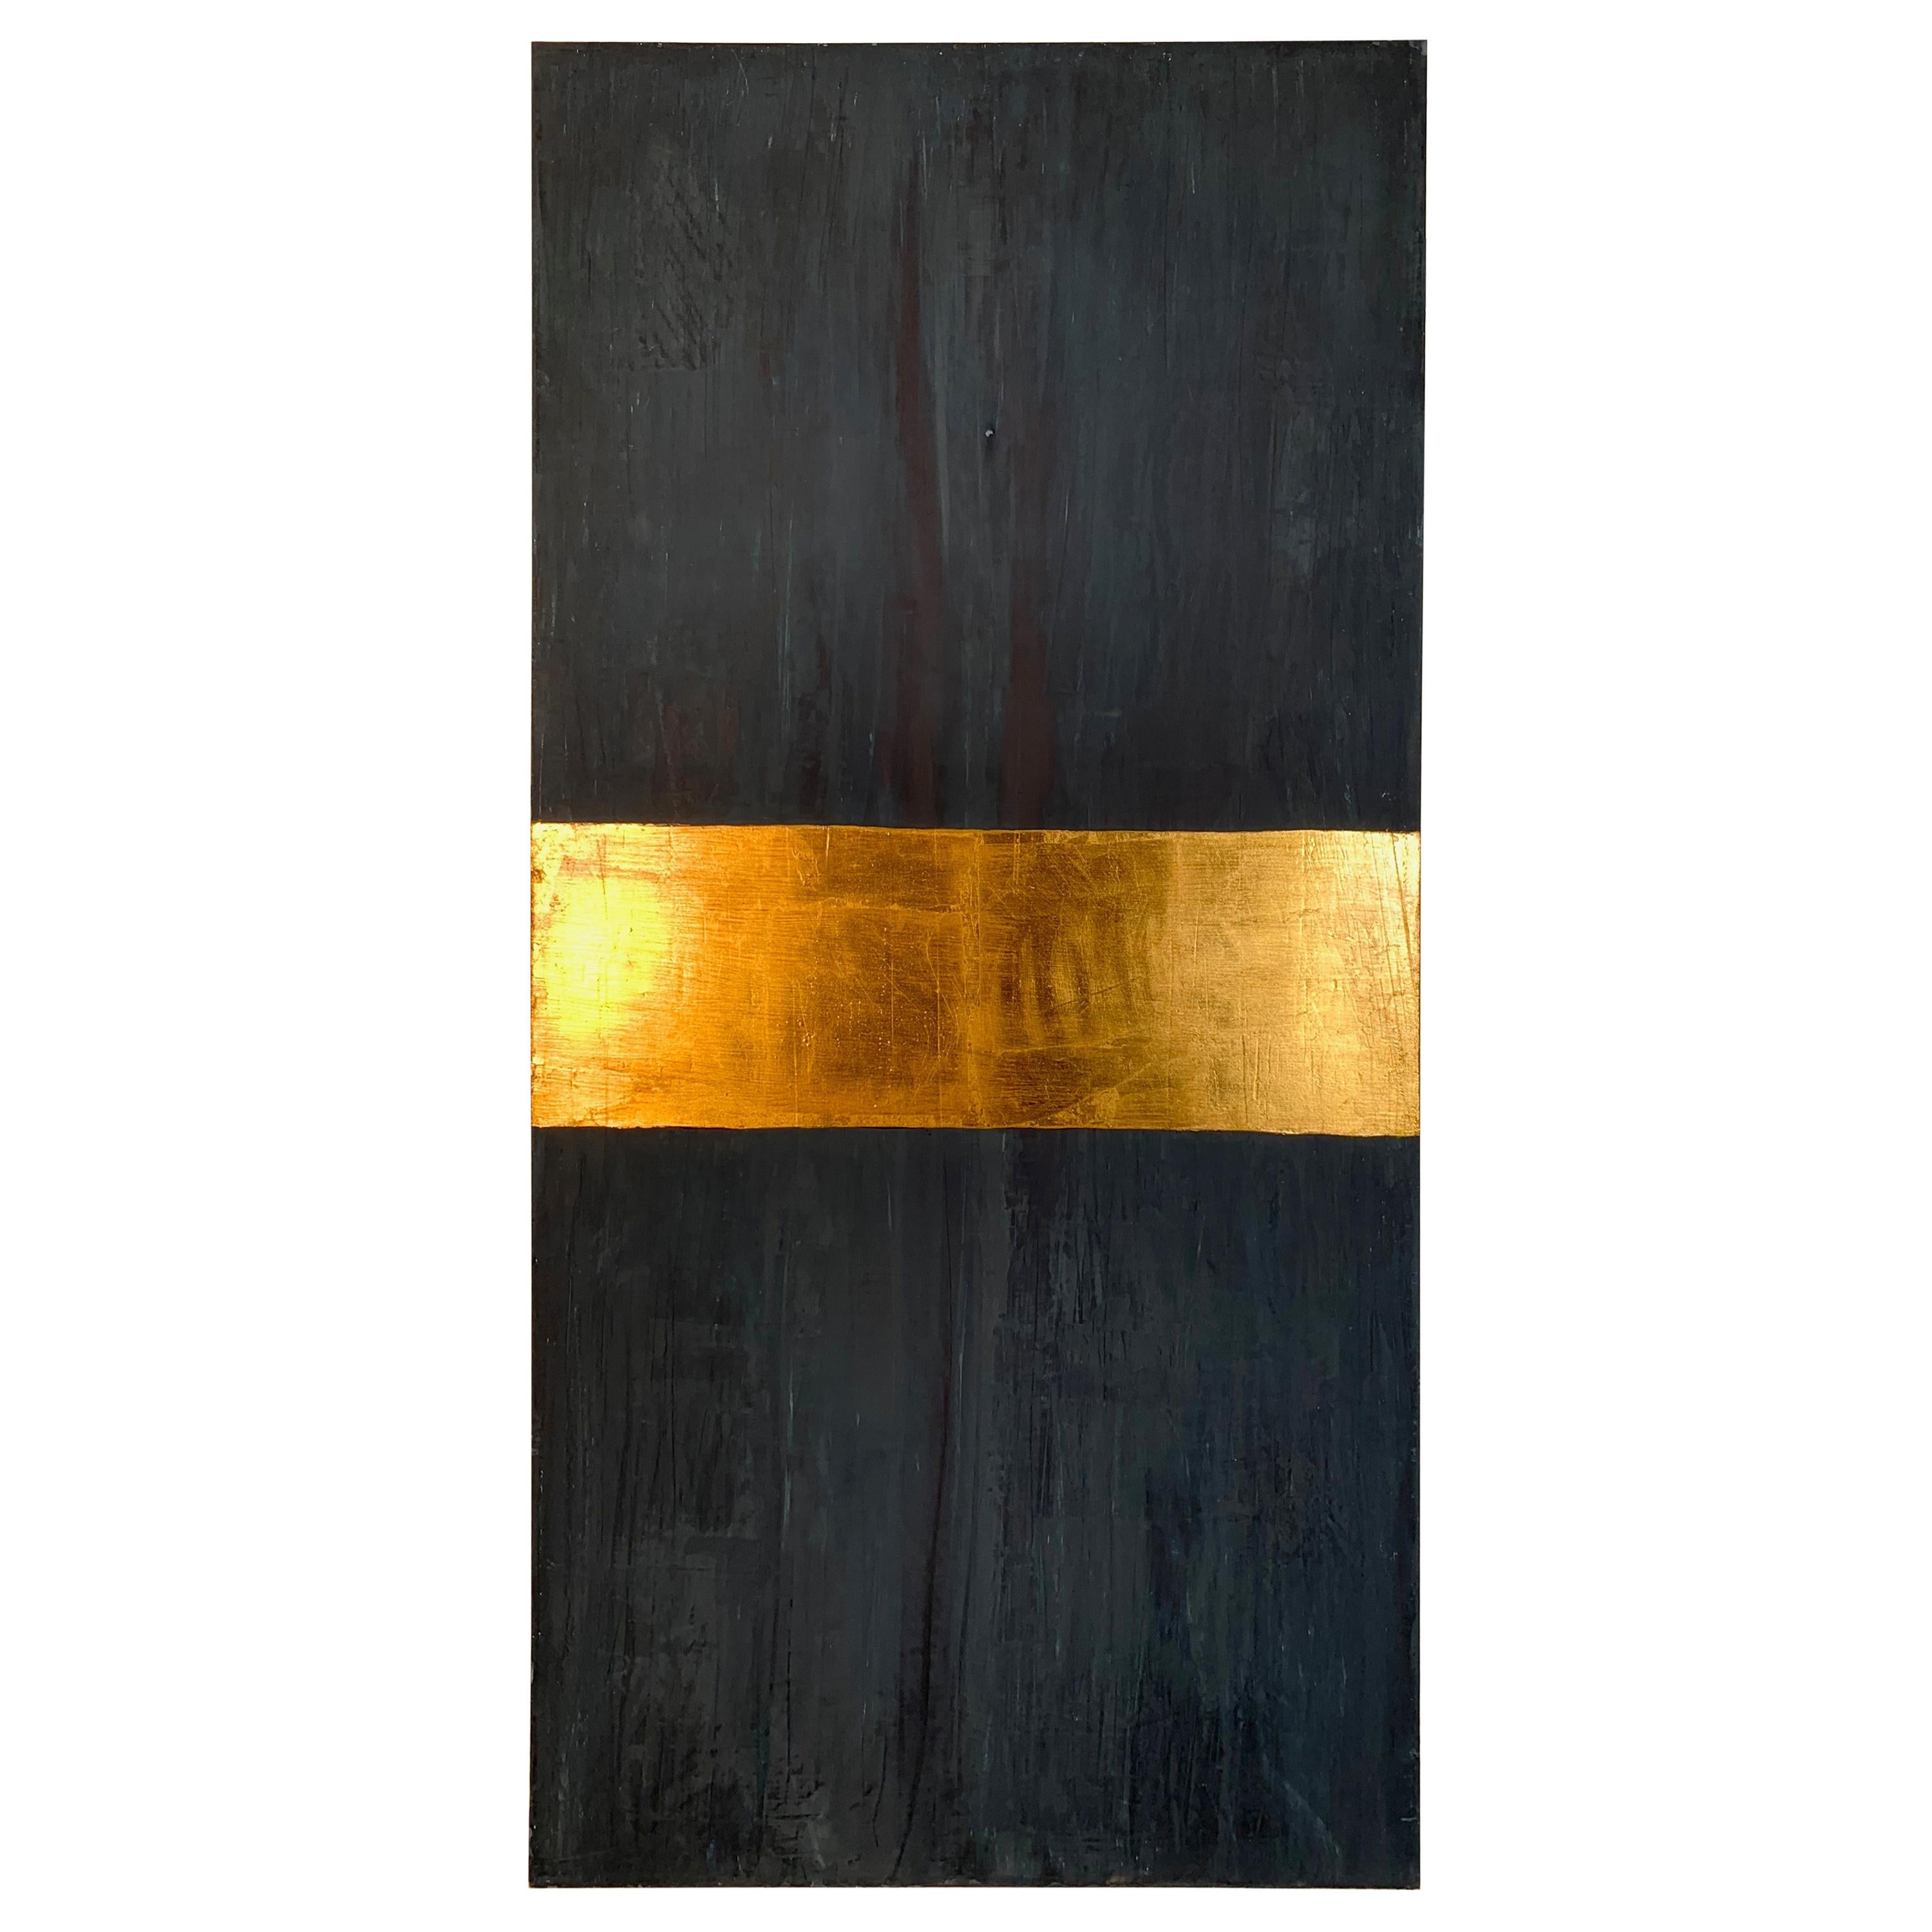 Carol Post, "Blue with Gold", Plaster and Acrylic with Gold Leaf on Canvas